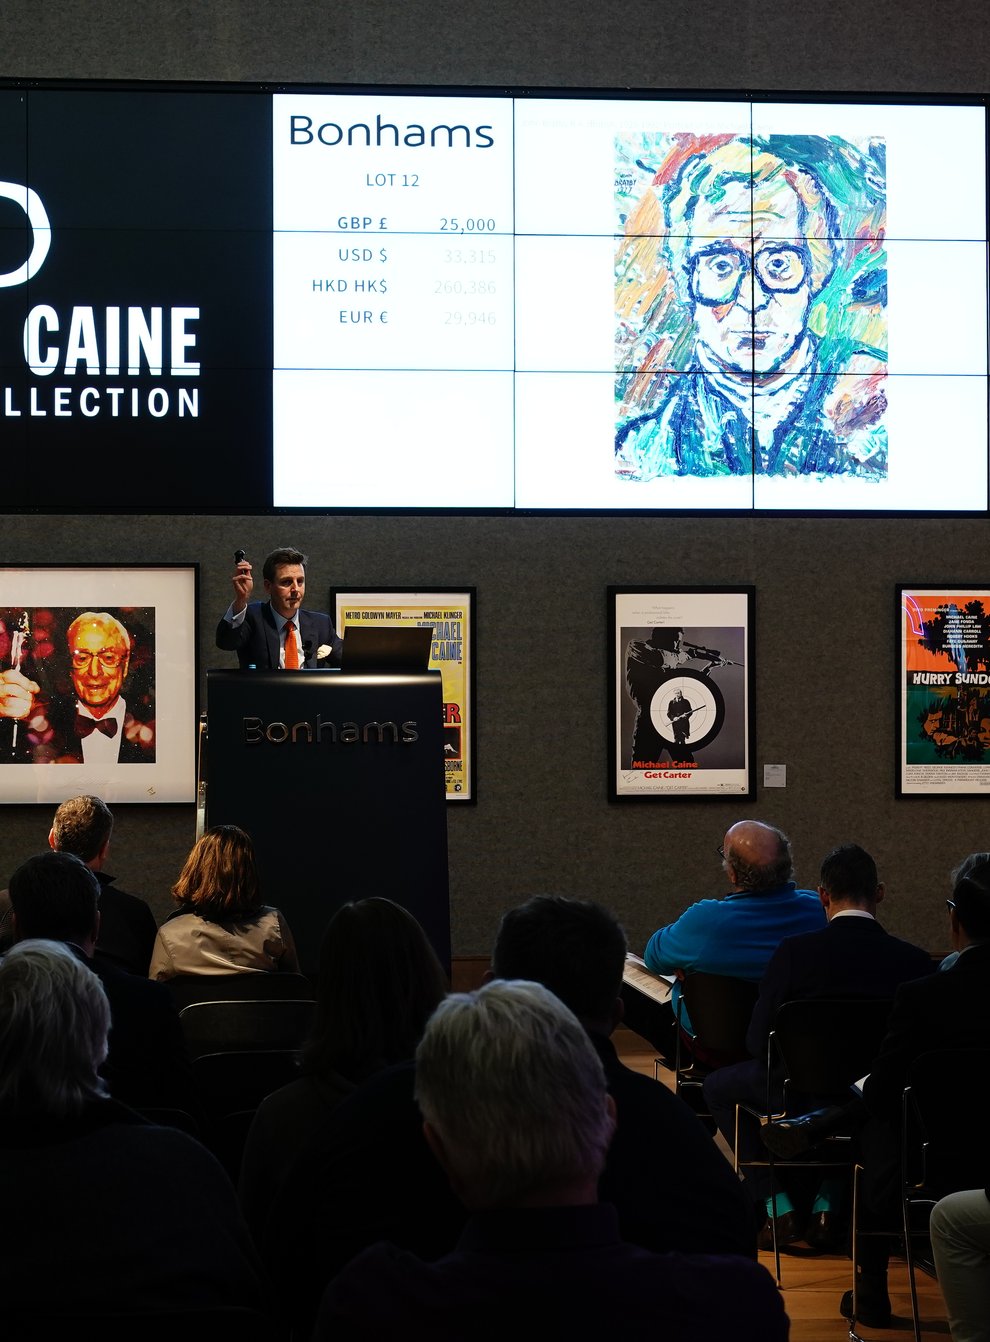 A portrait of Sir Michael Caine by artist John Bratby R.A. sells for £25,000 during the Sir Michael Caine collection sale at Bonhams in London. The sale contains a selection of items reflecting the breadth of Sir Michael’s career, ranging from movie posters, furniture including his desk, works of art and fine art (Aaron Chown/PA)